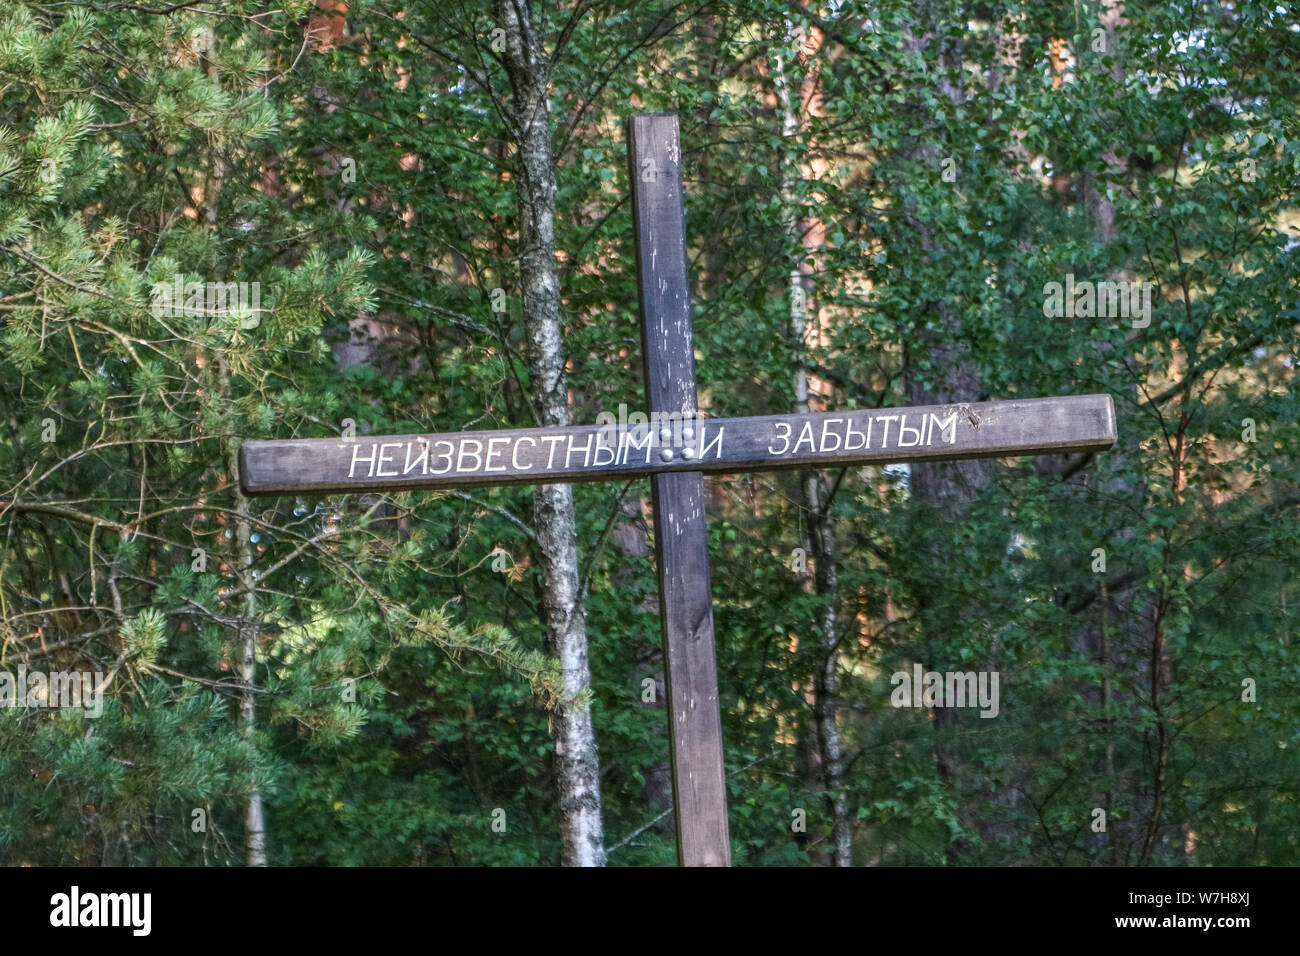 Borne Sulinowo, Poland. 3rd, August  2019 Cross with inscription that says - For unknown and forgotten  - is seen in Borne Sulinowo, Poland on 3 August 2019 Oflag II-D was a WWII German prisoner-of-war camp located at Gross Born was established to house French officers from the Battle of France, later Polish and Soviet soldiers. In Ja. 1945 there were 5,014 officers and 377 orderlies in the camp. © Vadim Pacajev / Alamy Live News Stock Photo